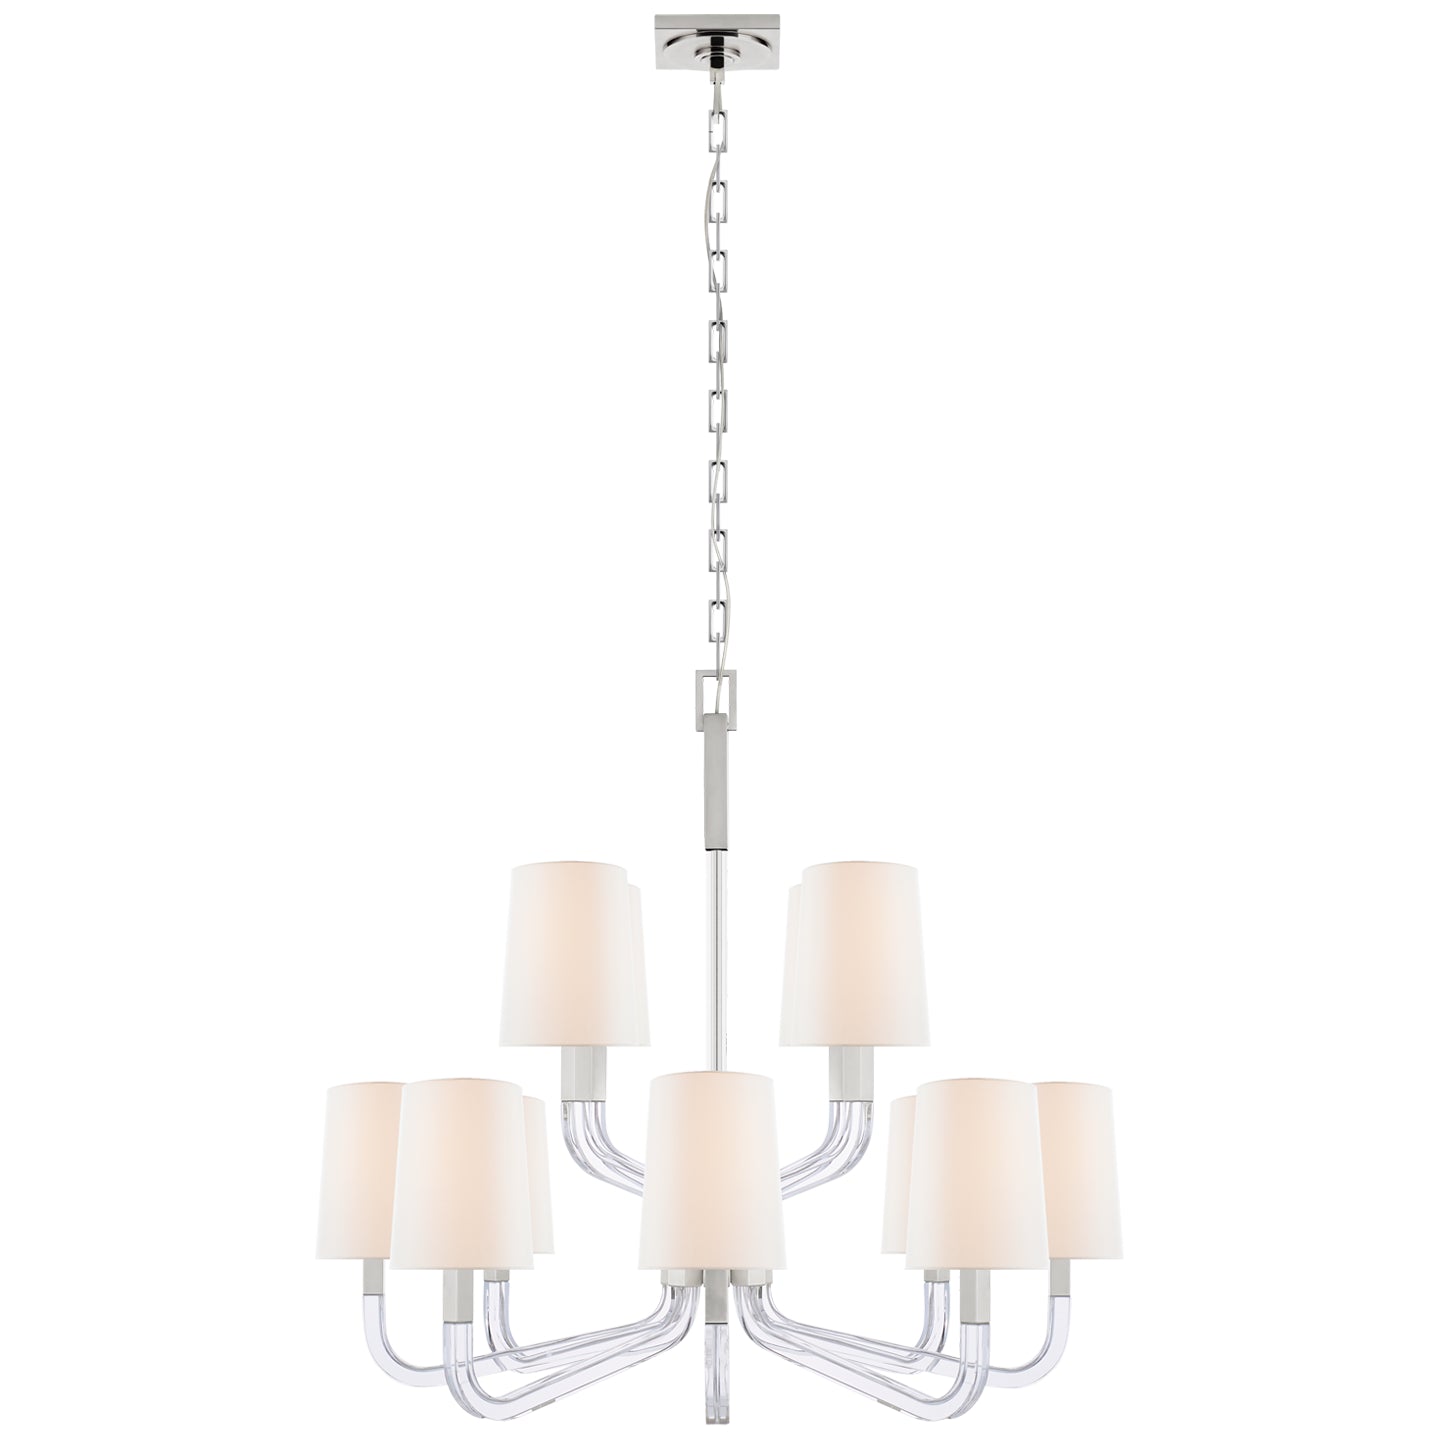 Visual Comfort Signature - CHC 5903PN/CG-L - 12 Light Chandelier - Reagan - Polished Nickel and Crystal